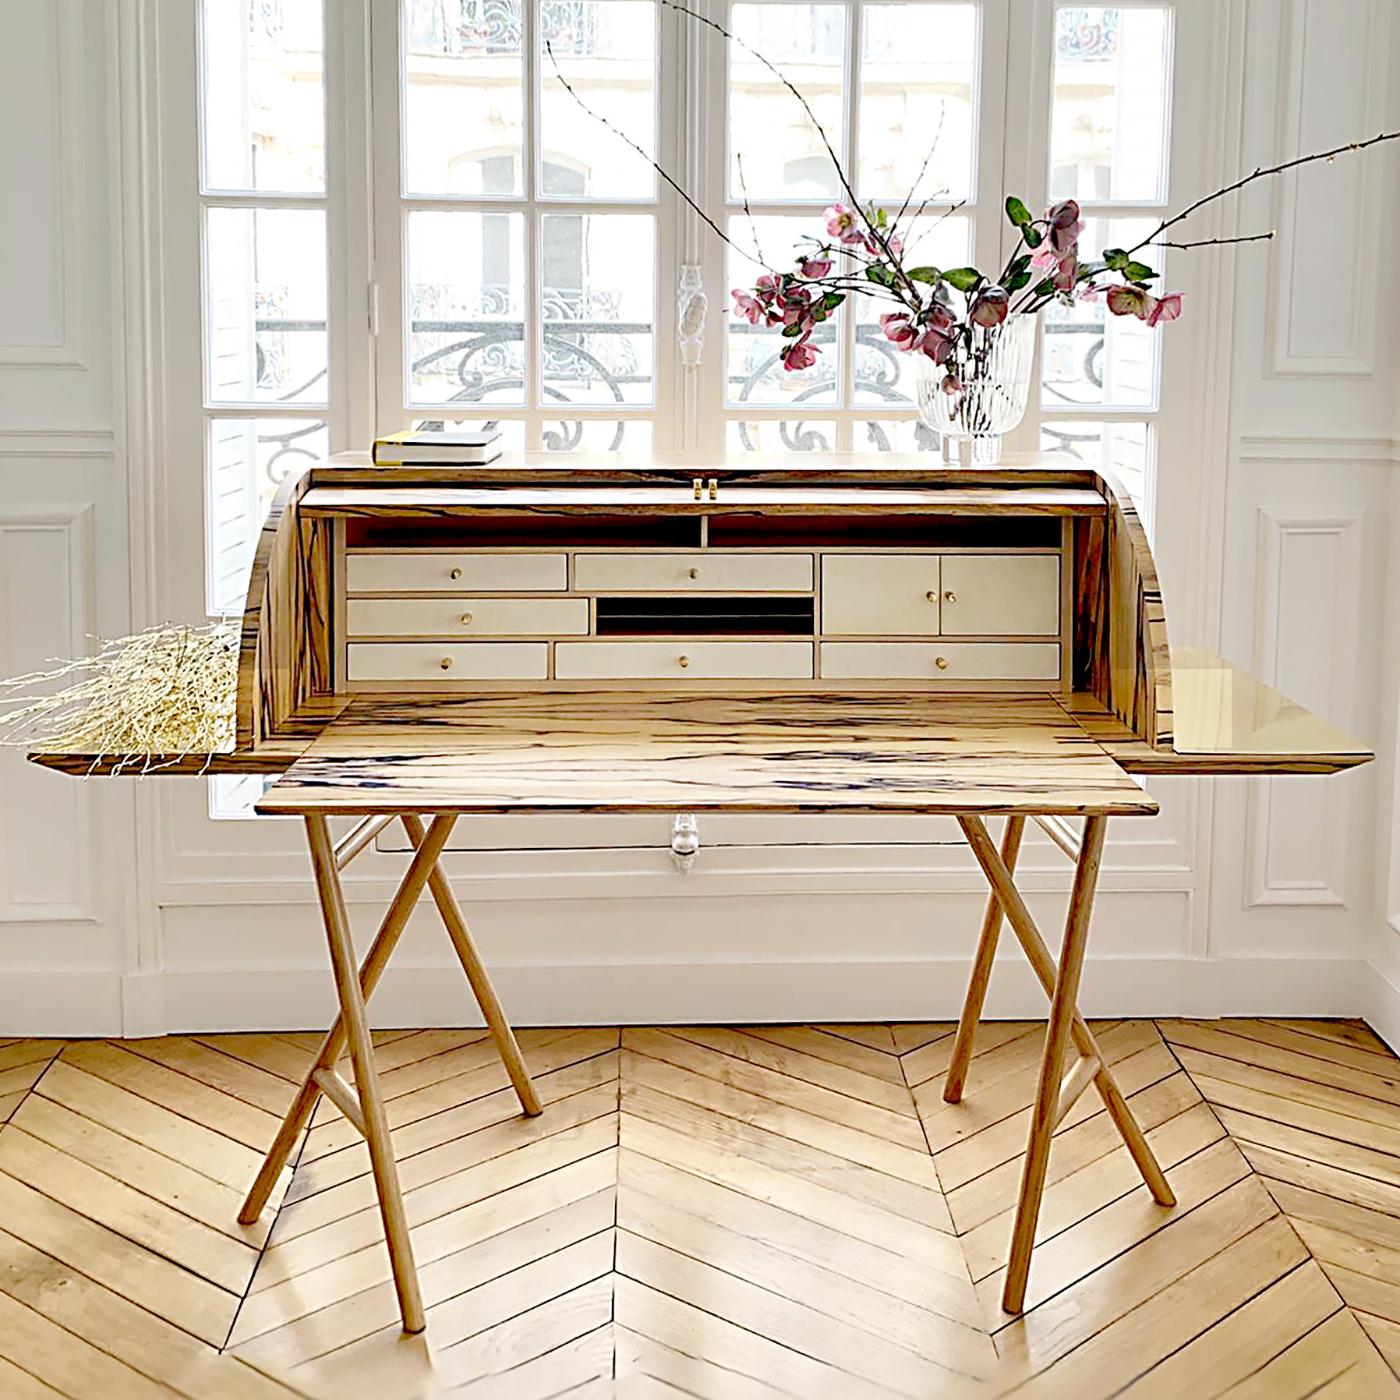 Italian 21st Century Charles Dix Desk, White Ebony, White Maple and Brass, Made in Italy For Sale